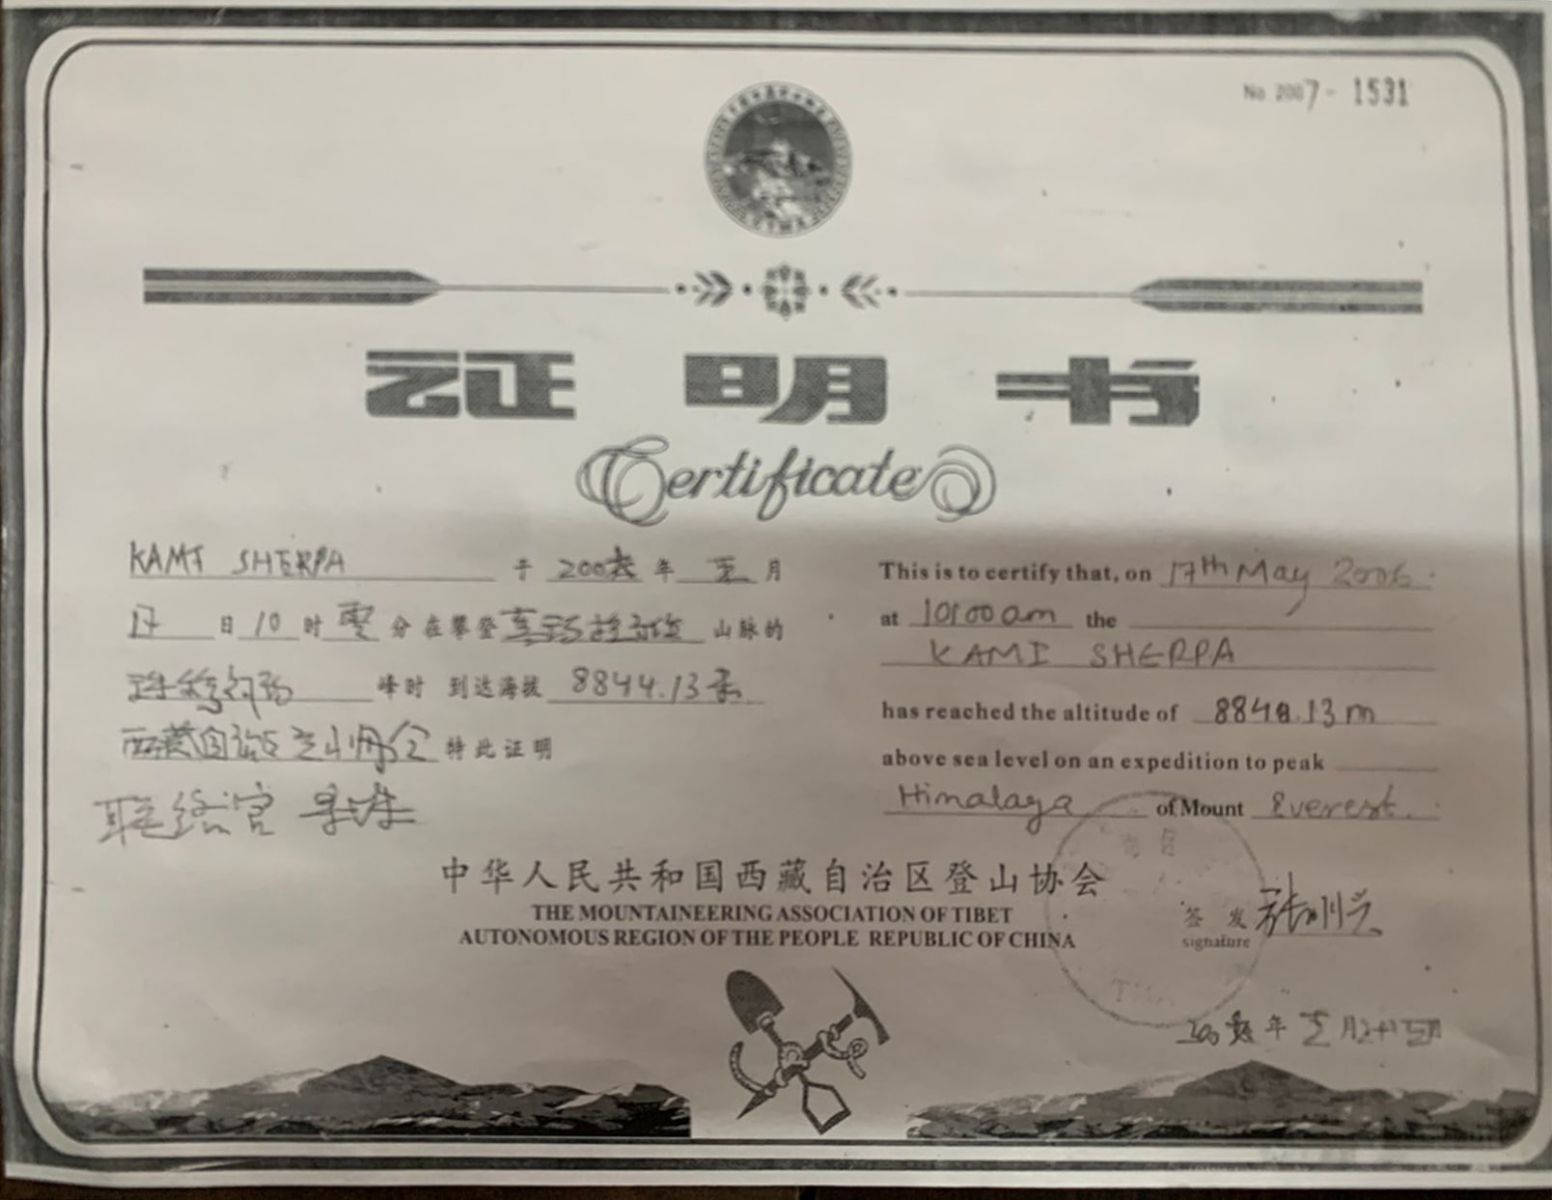 Certificate of Appreciation issued by The Mountaineering Association of Tibet, Autonomous region of People Republic of China for successfully climbing Mt. Everest (8848.13 m) in 17 May 2006